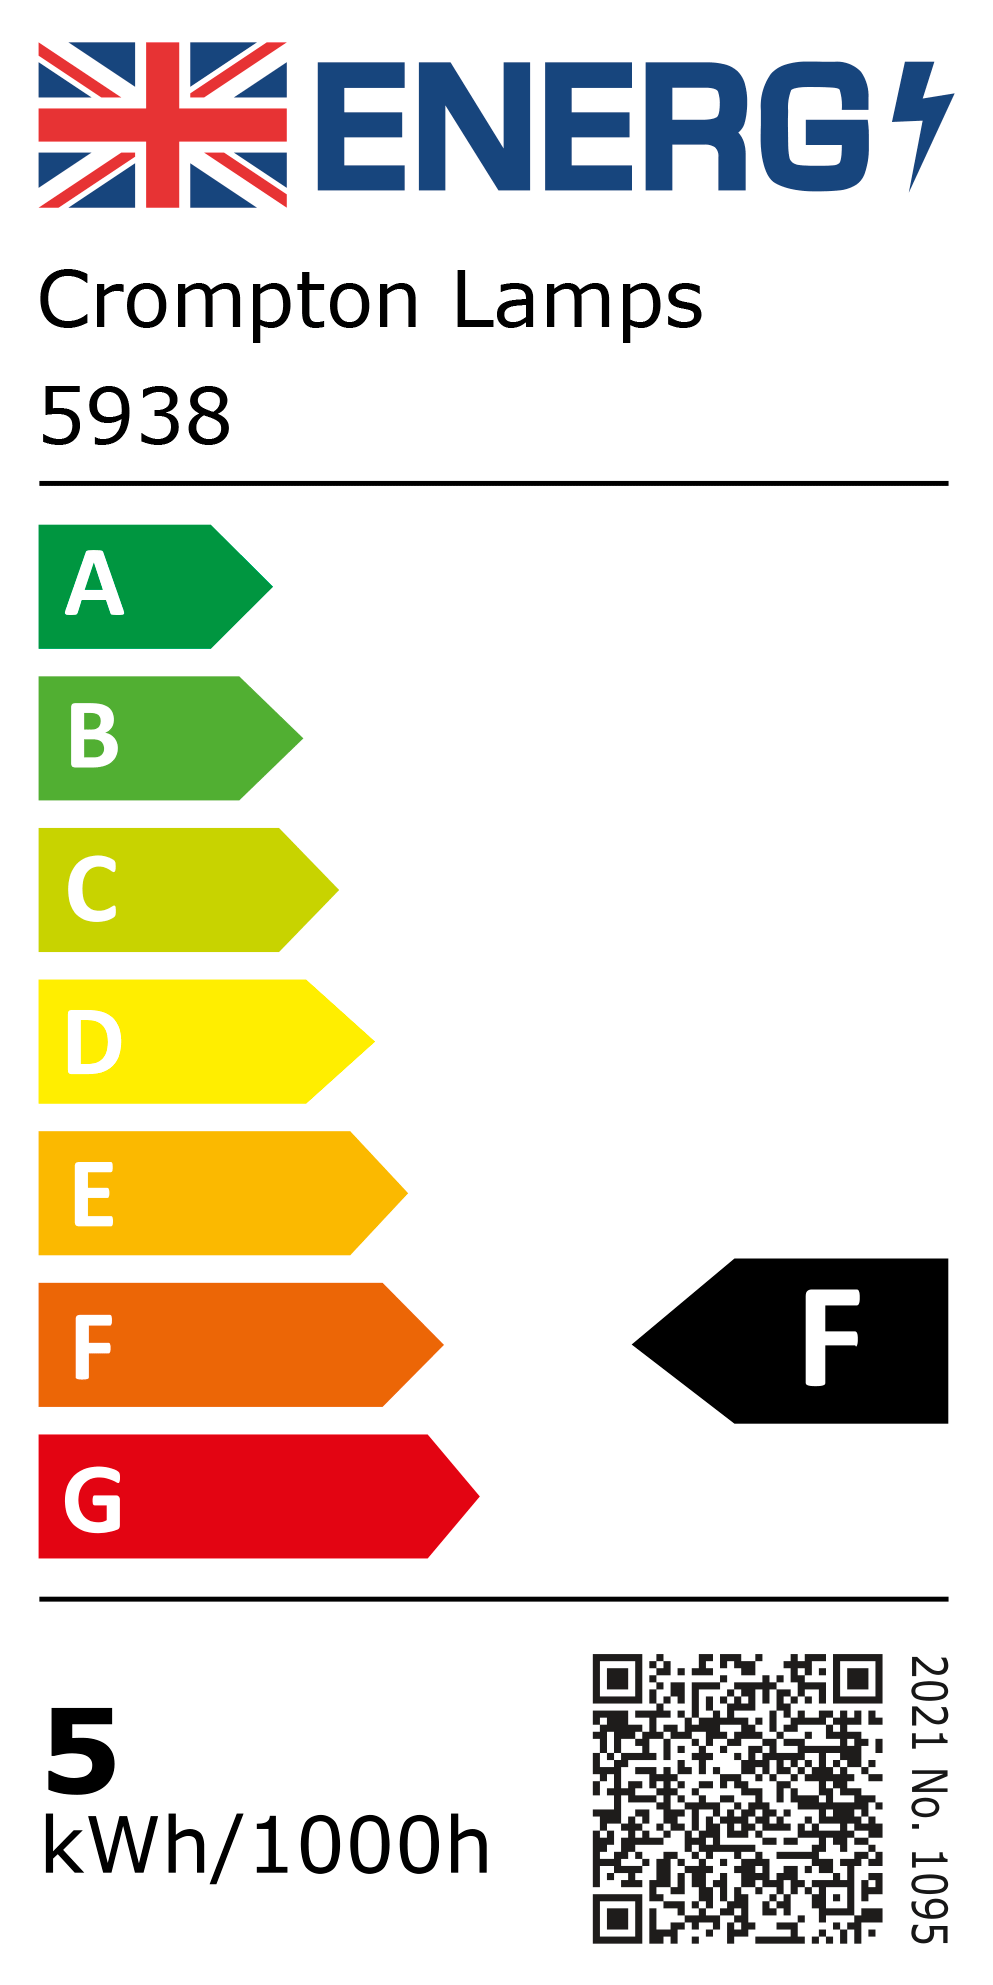 New 2021 Energy Rating Label: Stock Code 5938